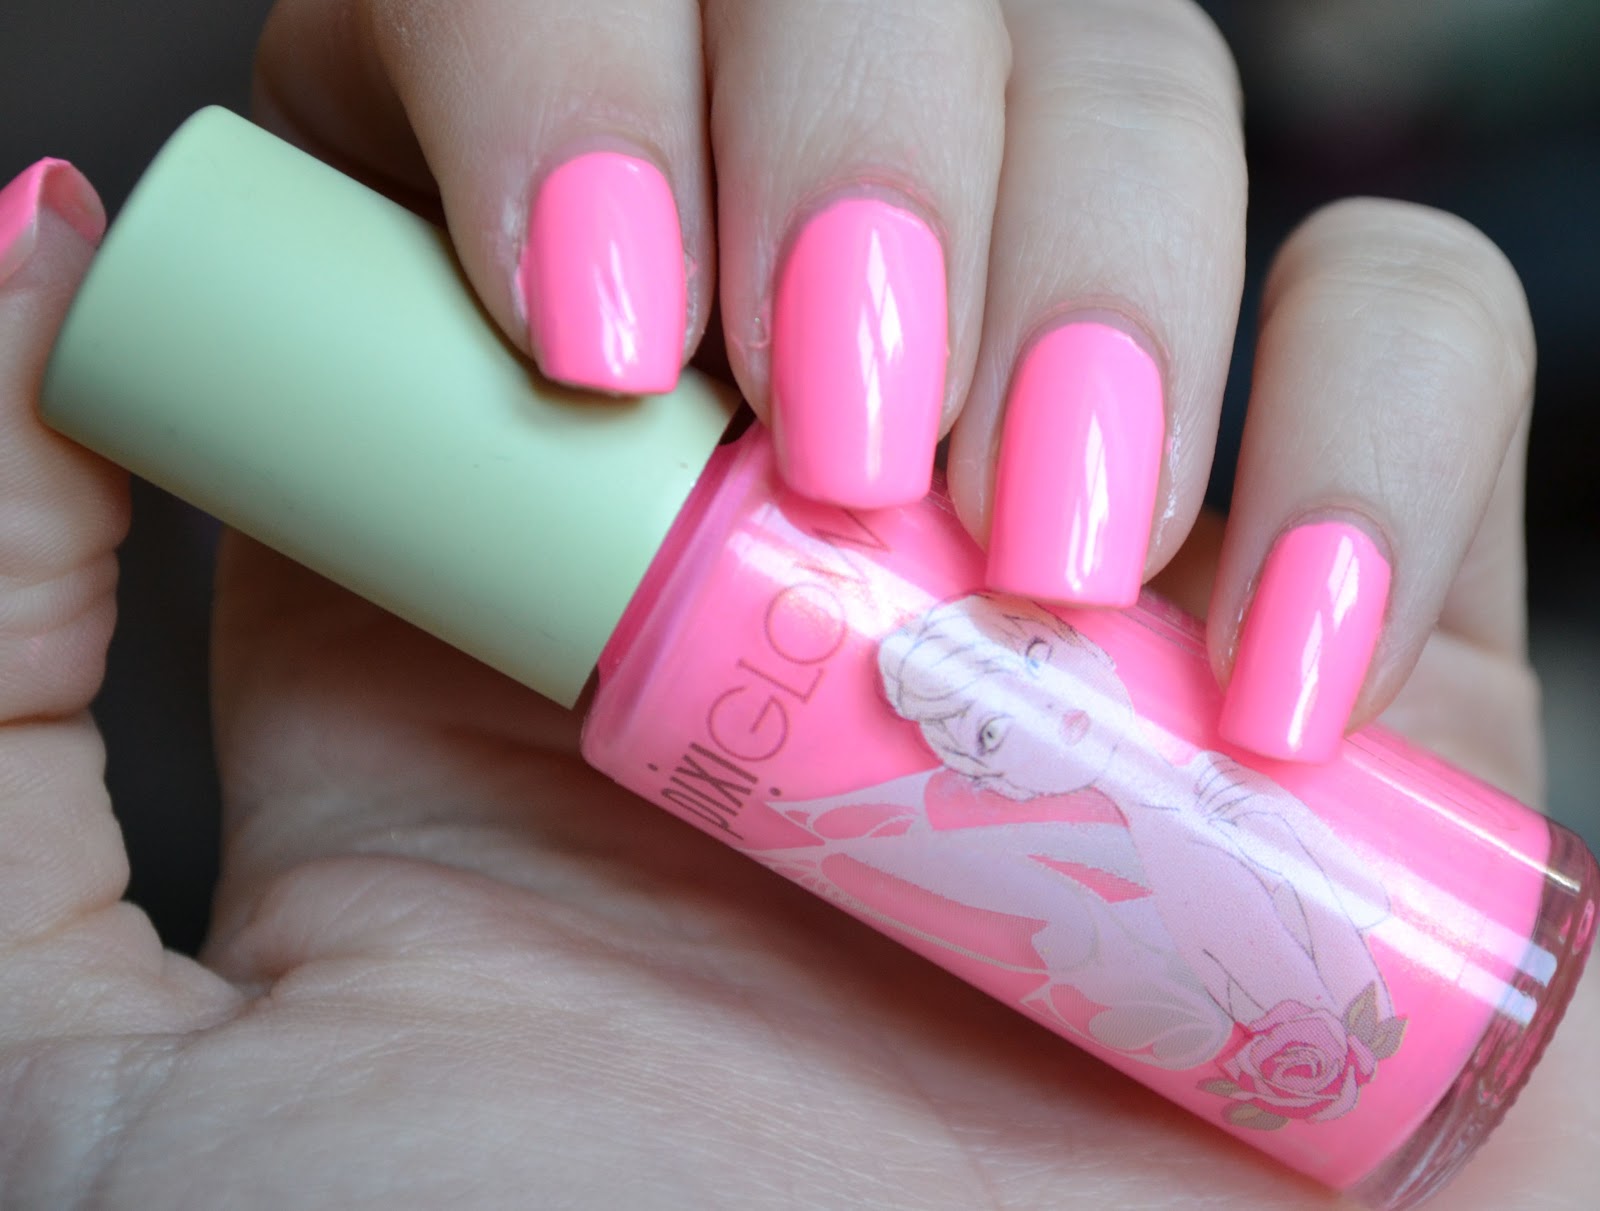 PixiGlow Nail Polish 408 Pirouette Pink Swatch & Review.